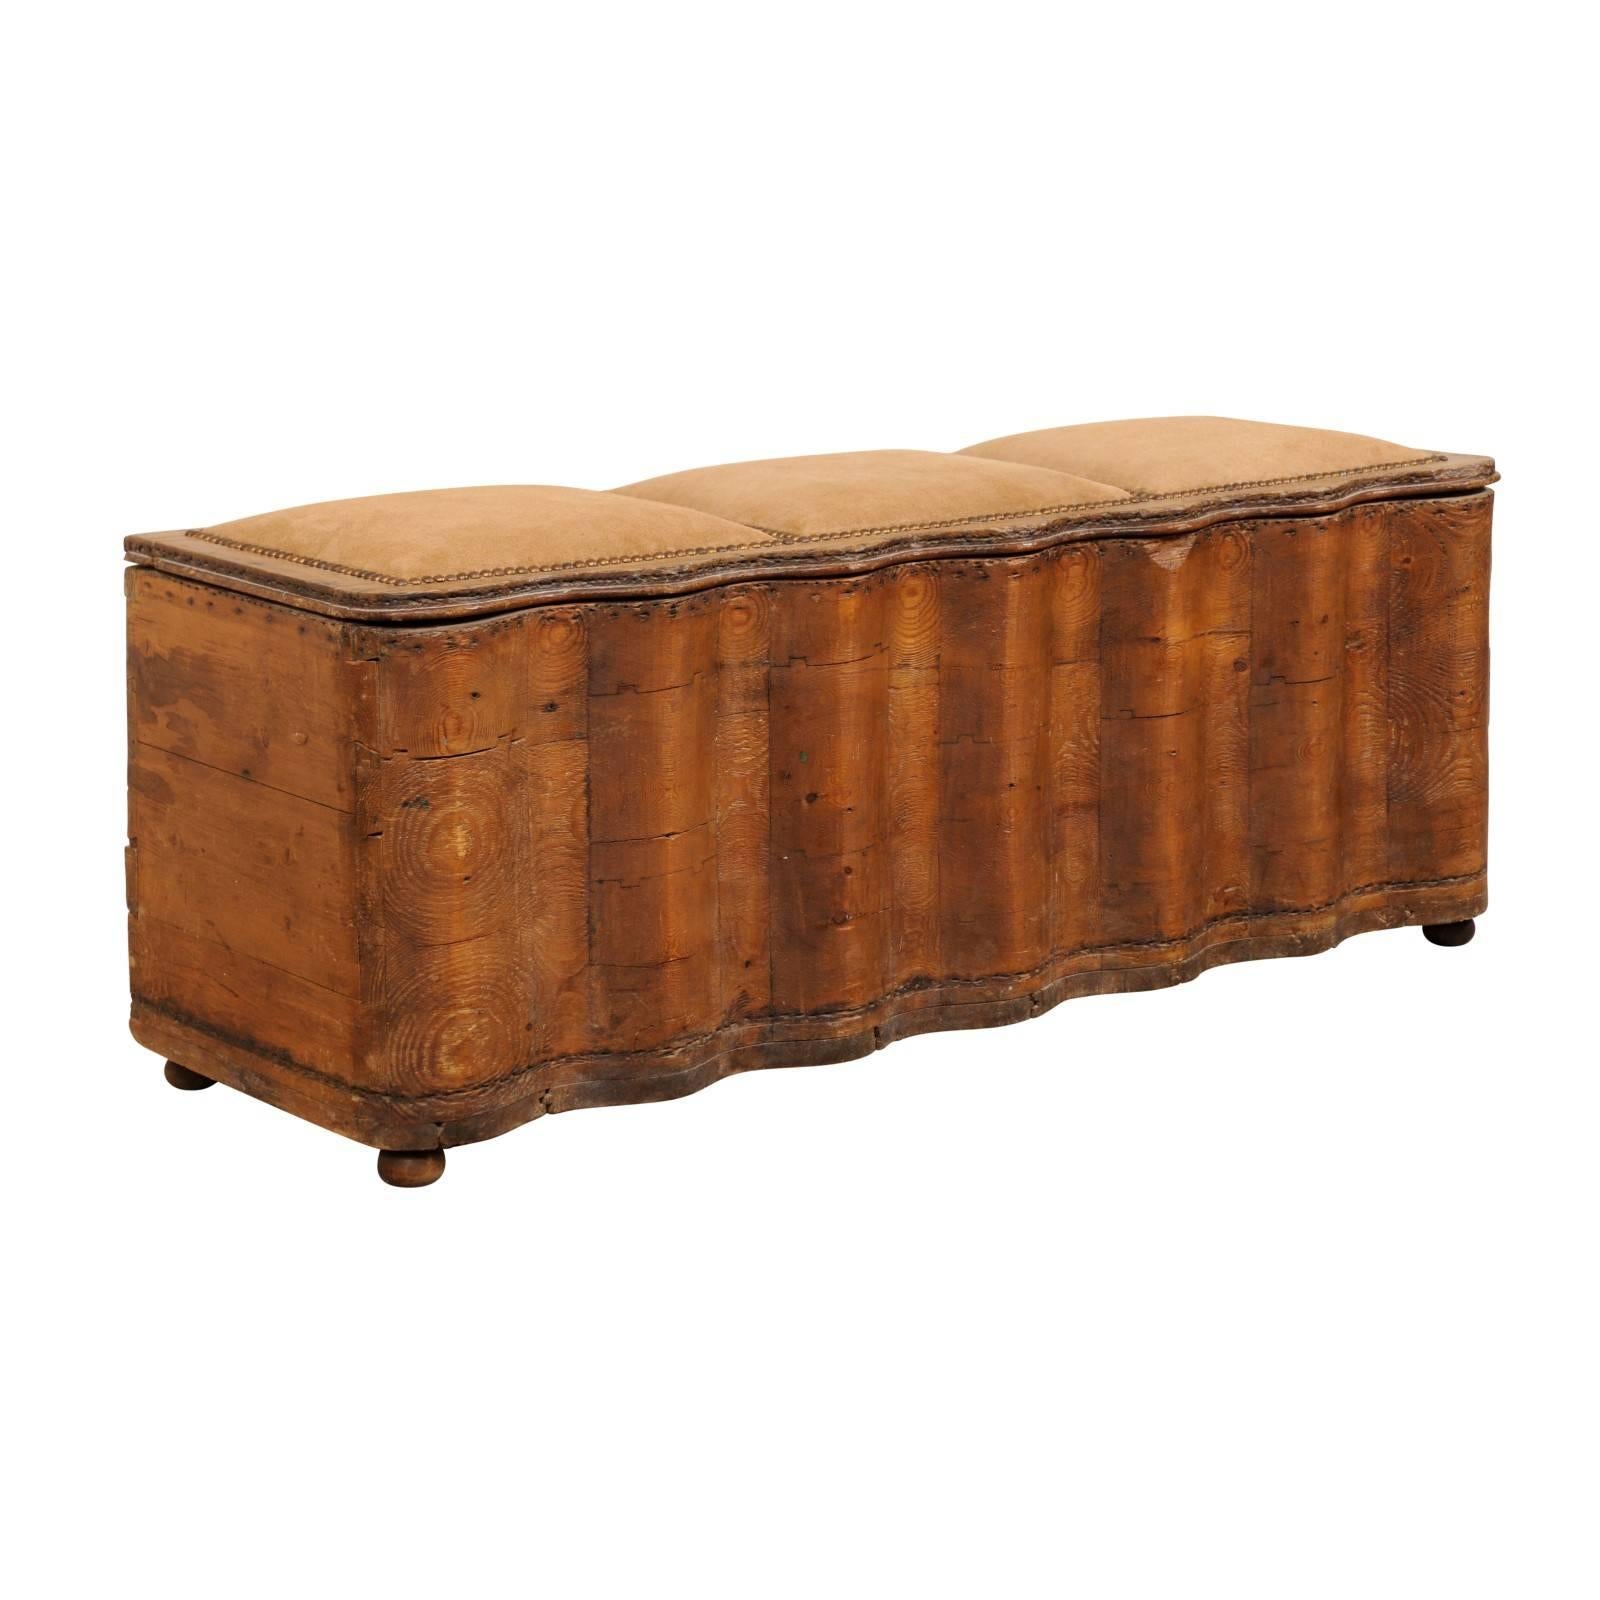 Italian Early 19th Century Undulating Wood Bench with Storage and Suede Top